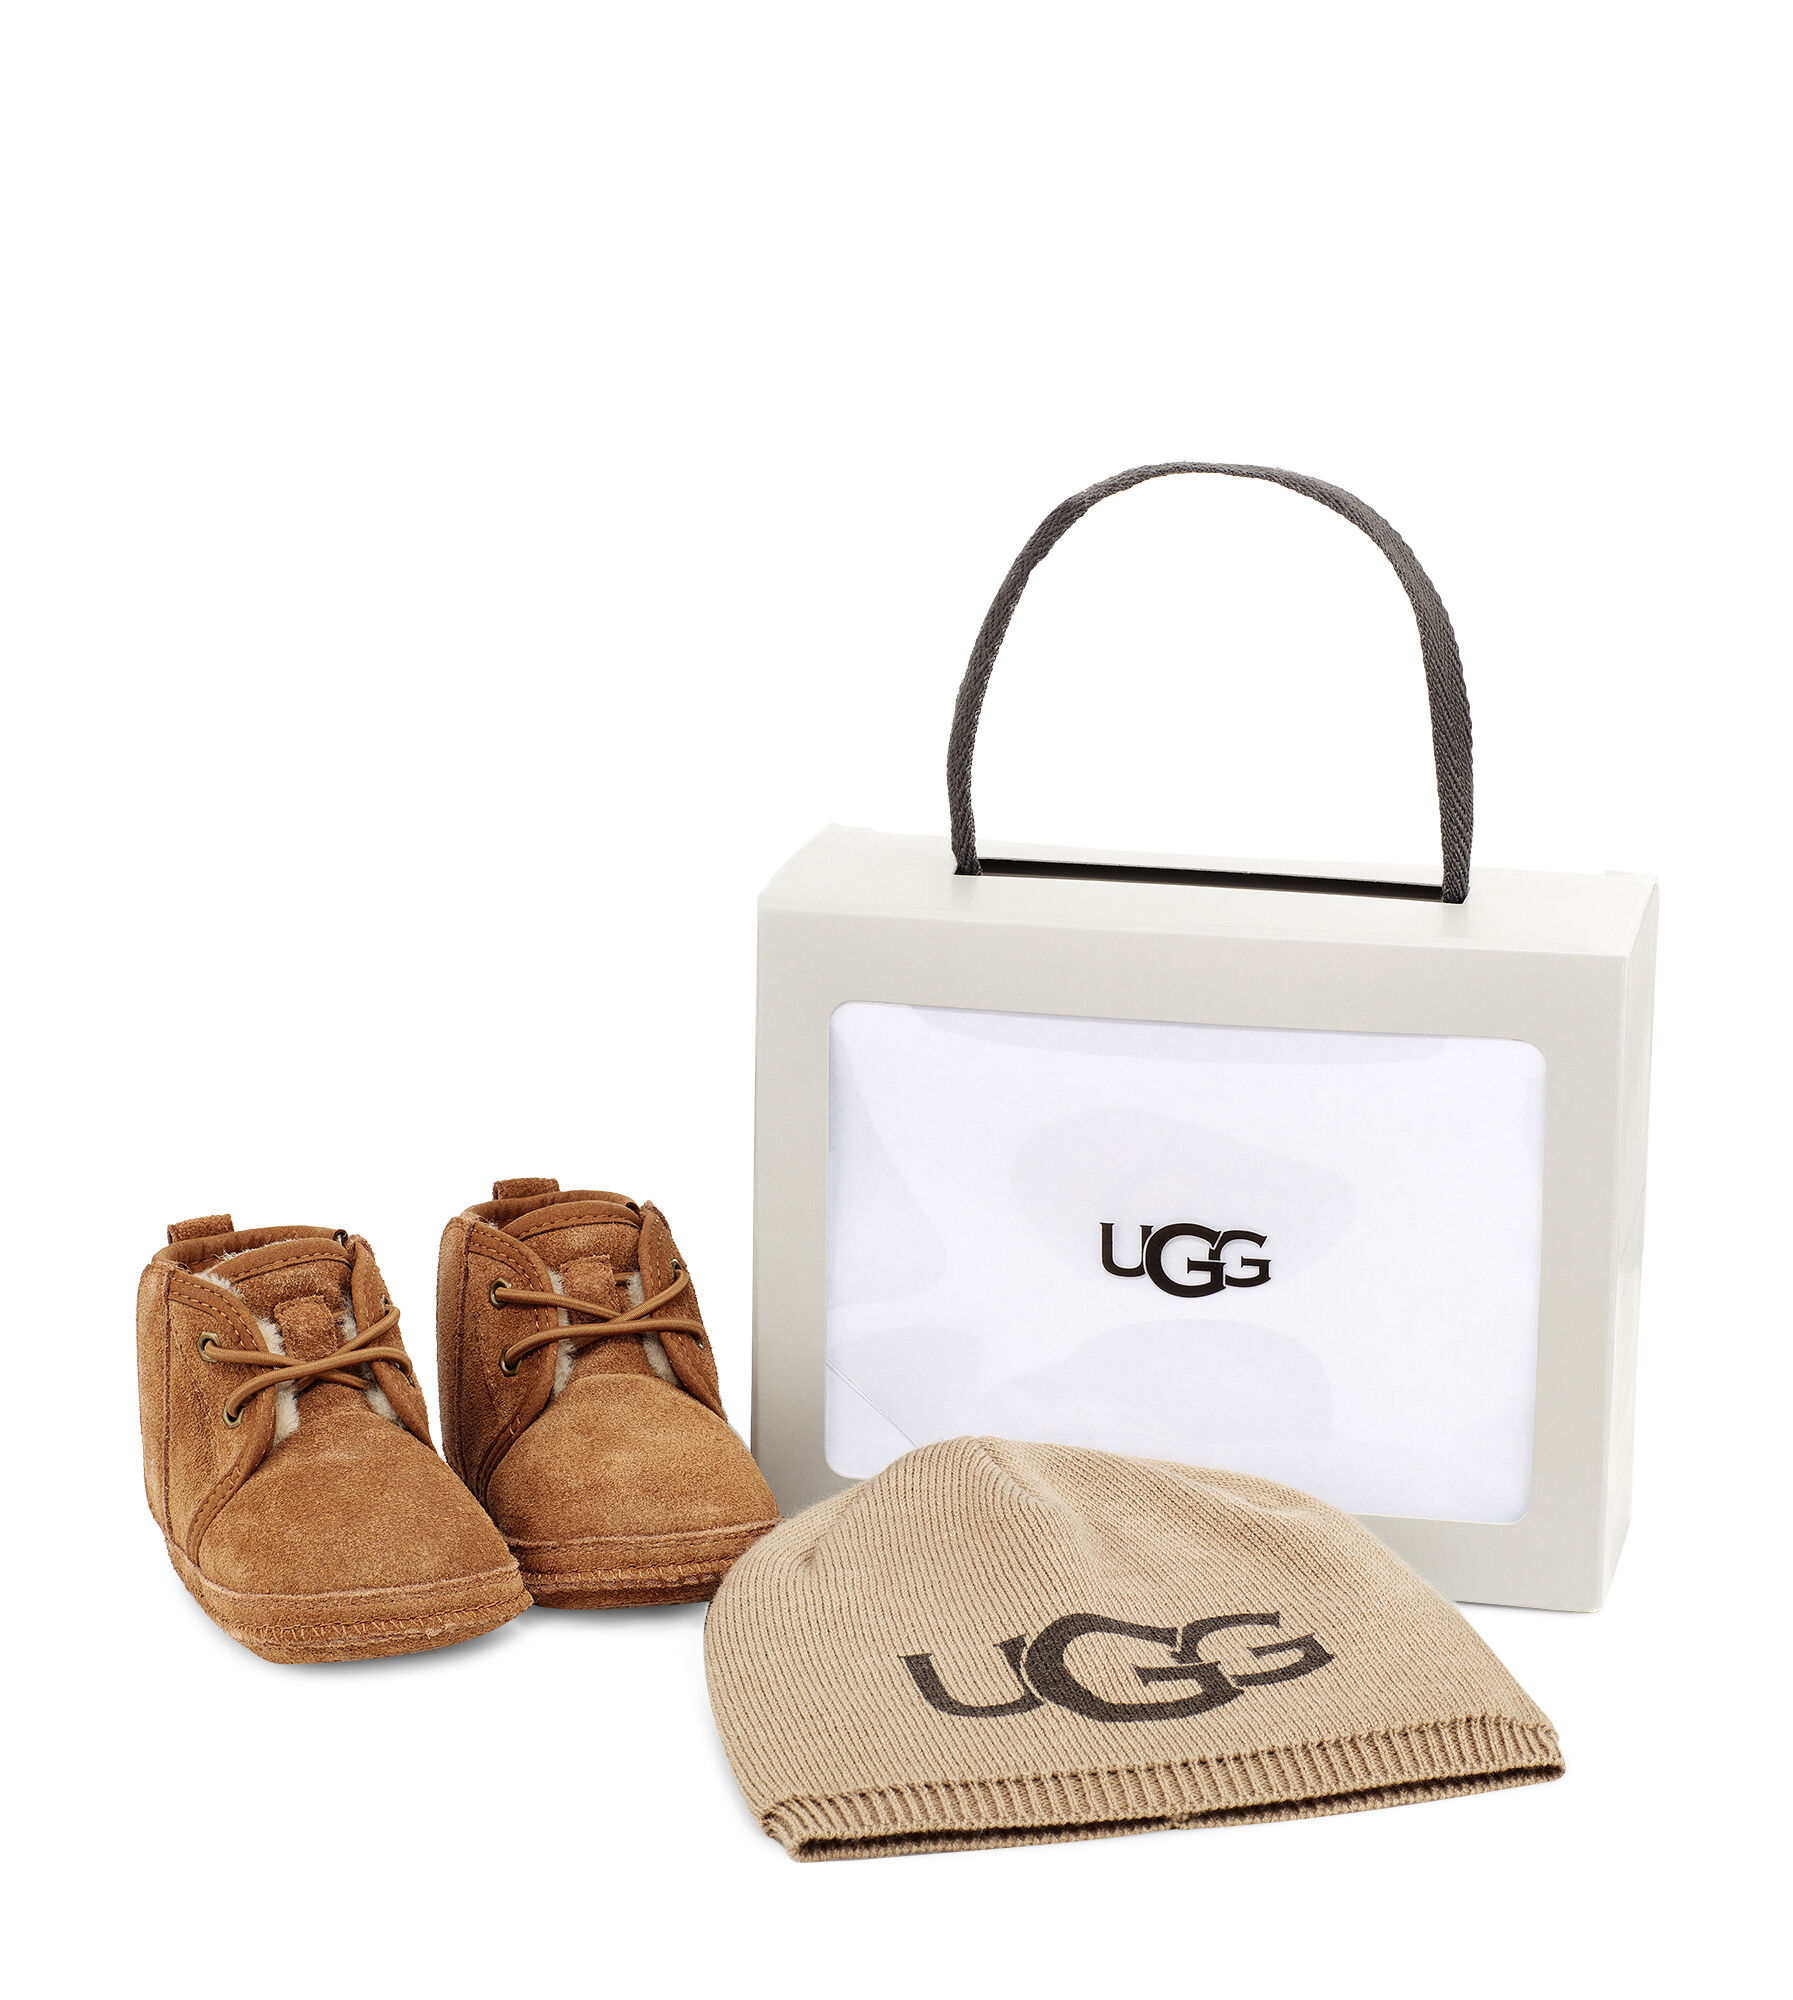 ugg baby shoes